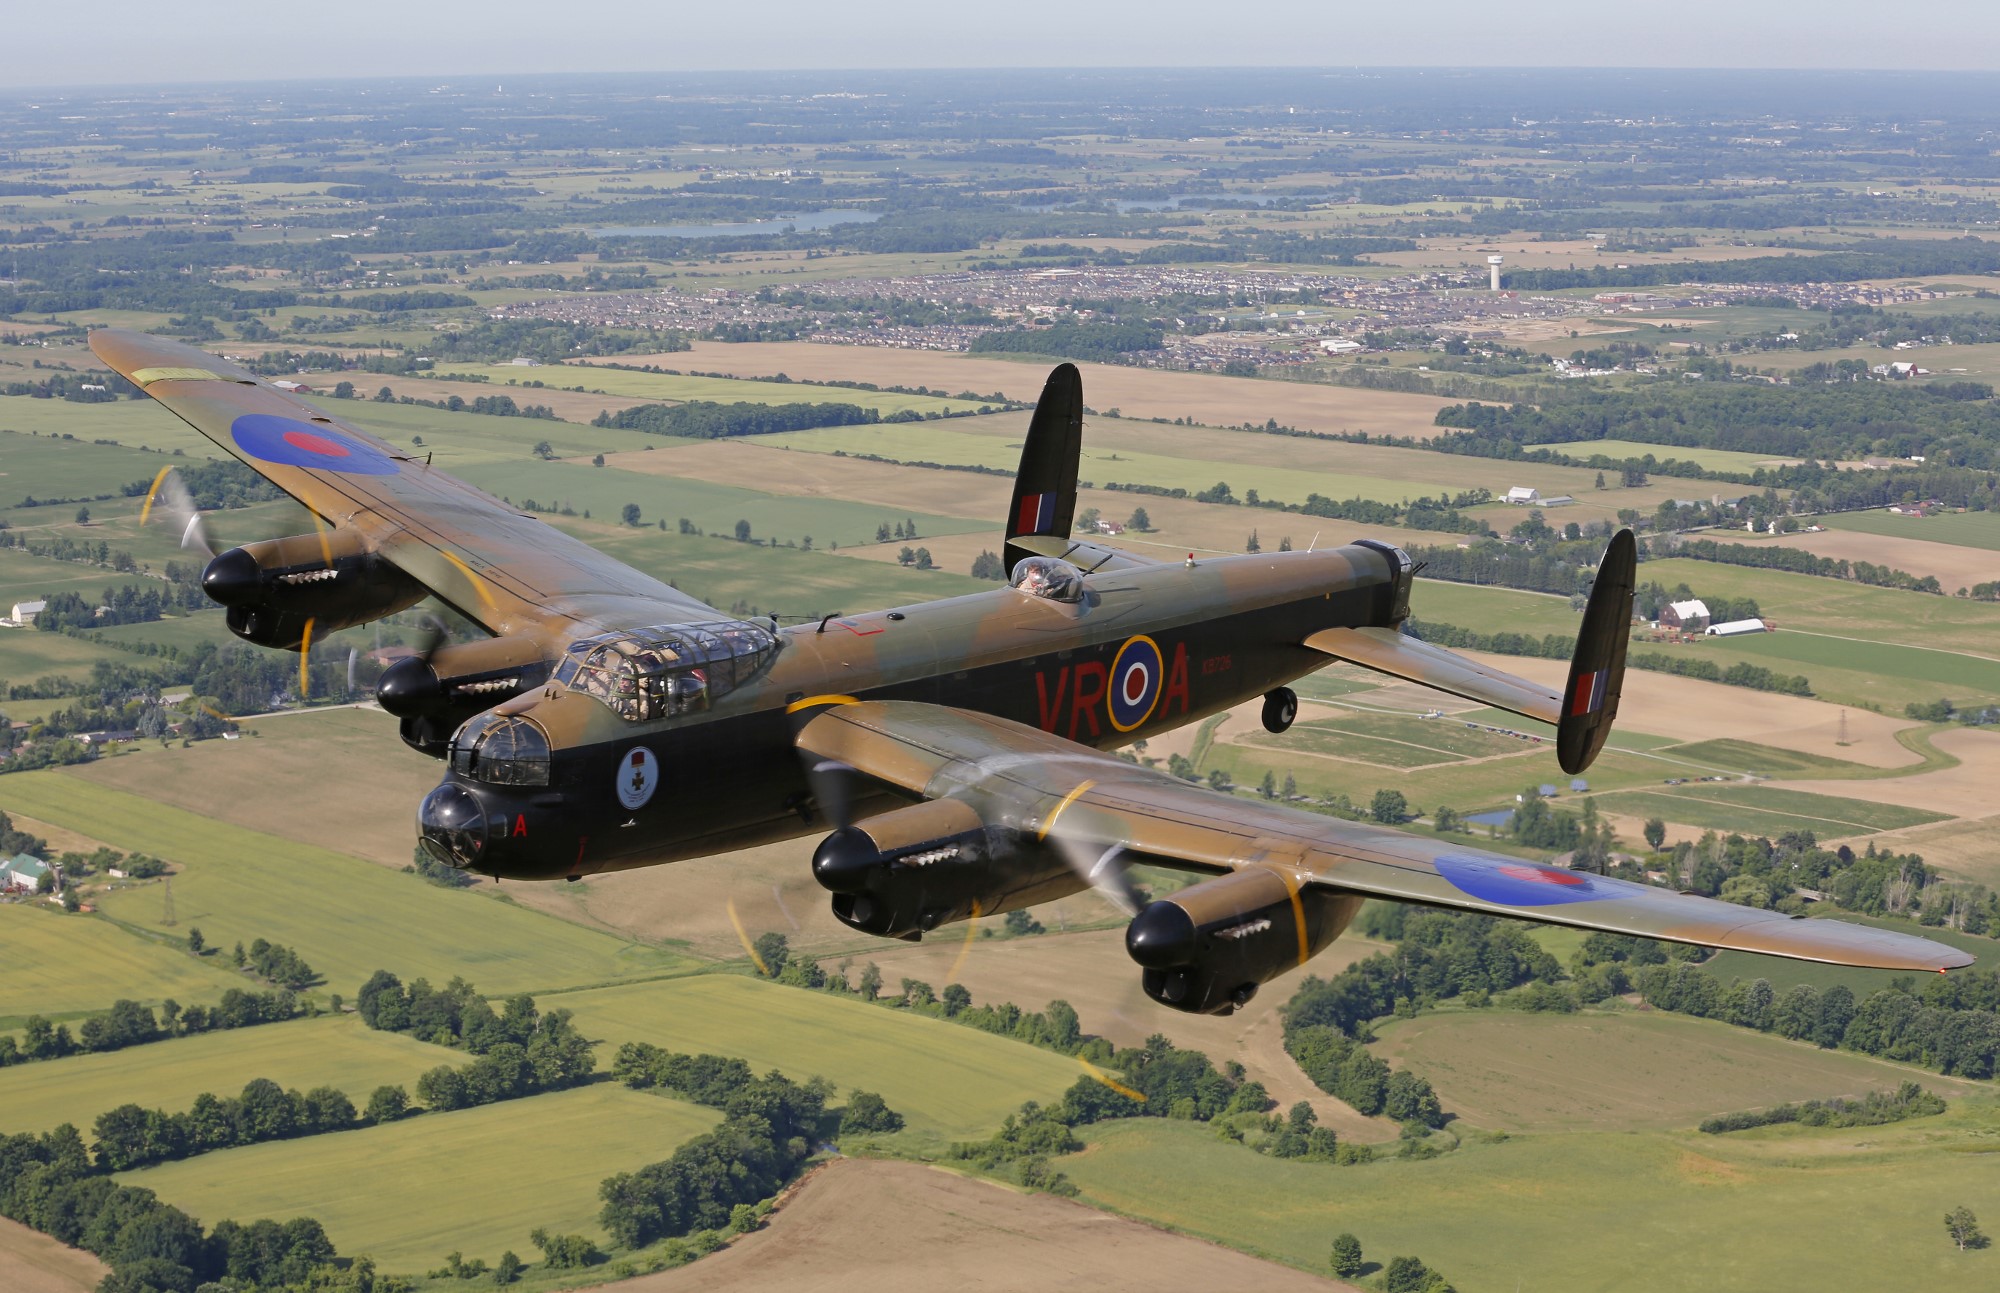 Avro Lancaster aircraft flying over patchwork fields